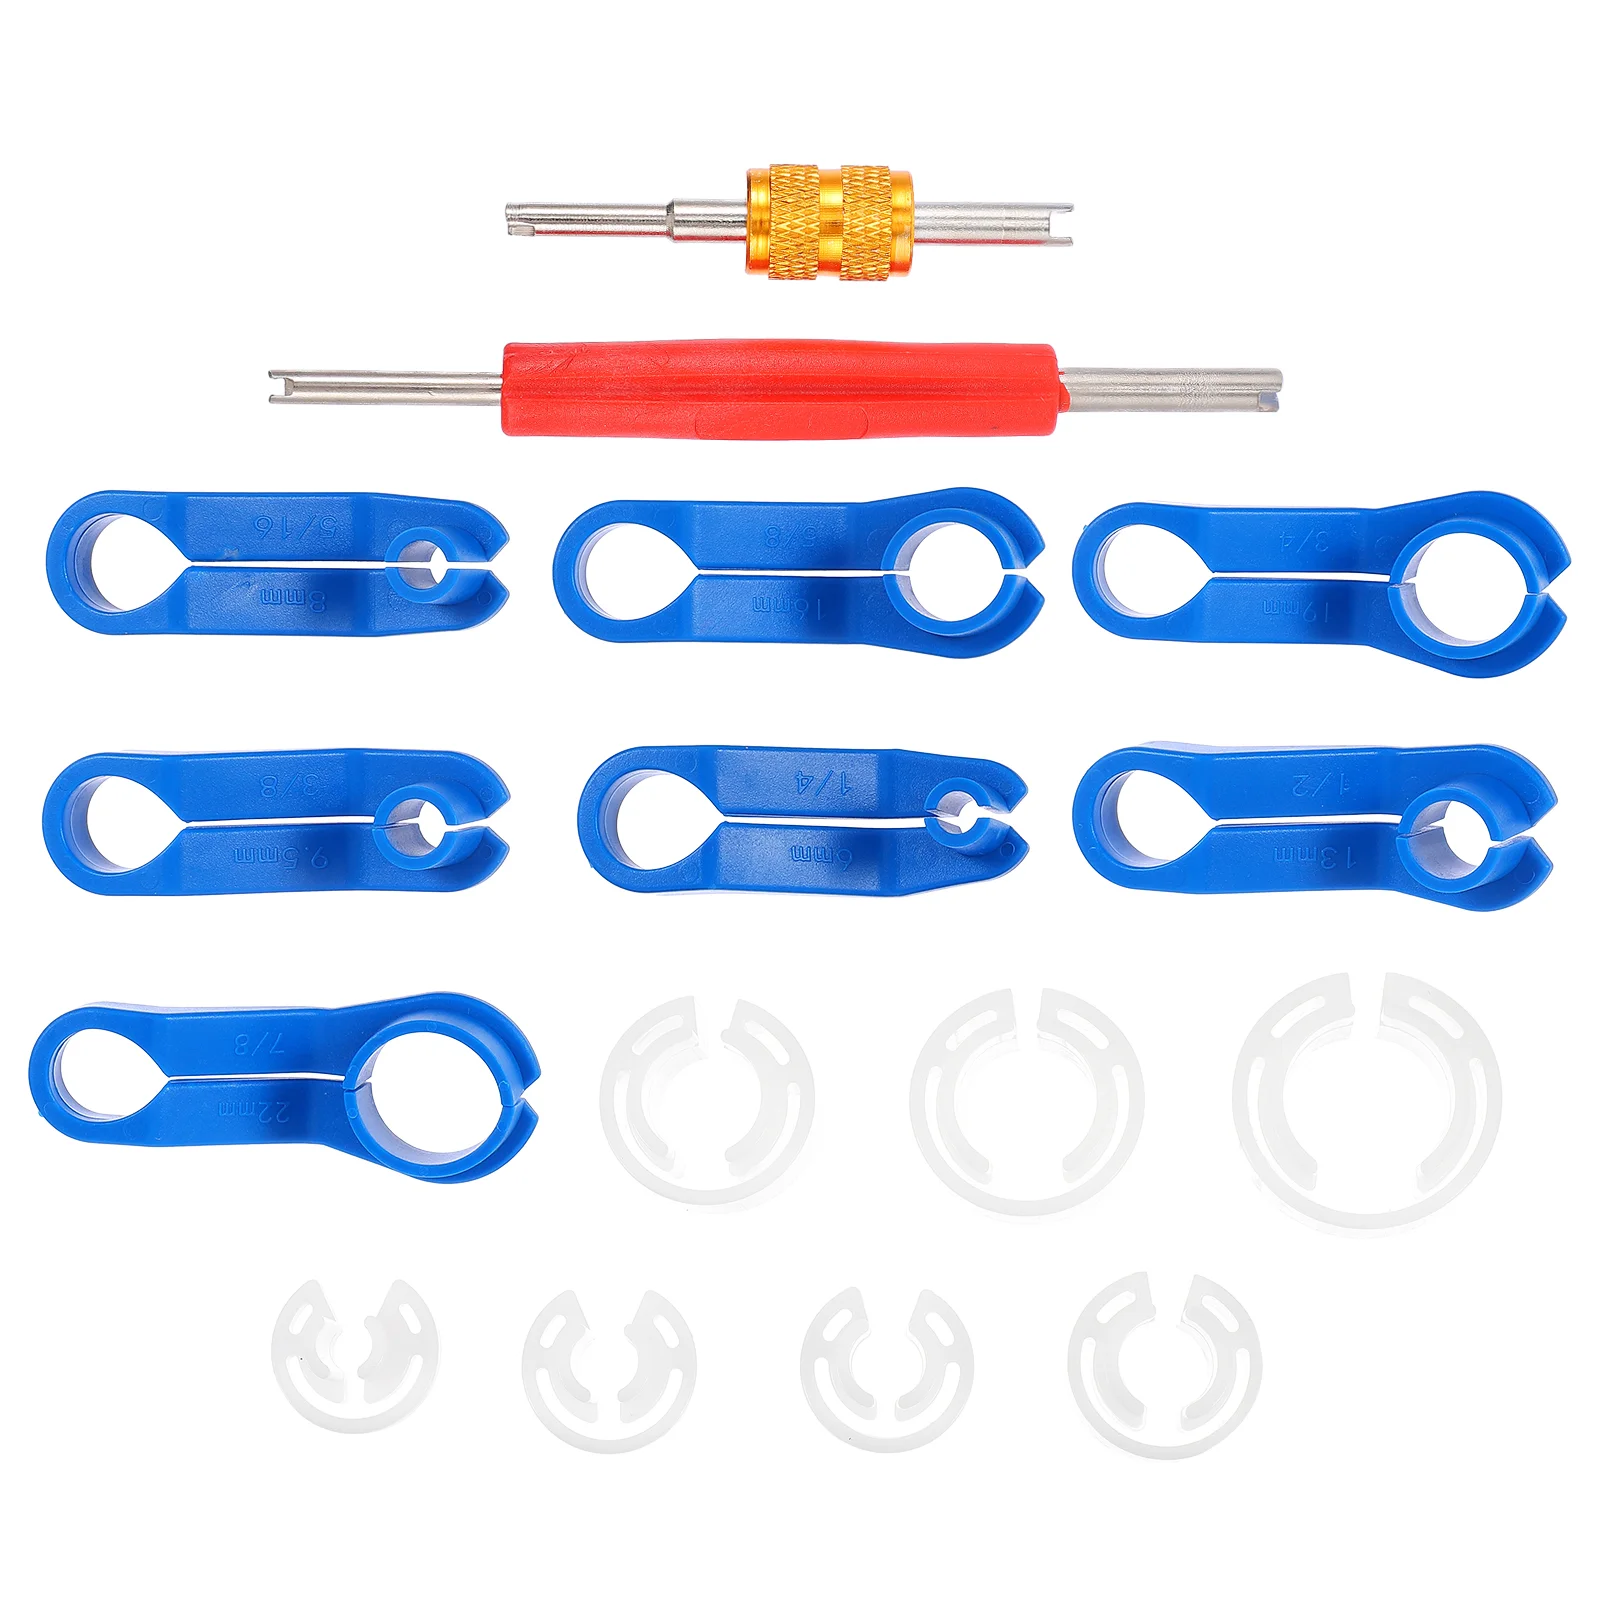 

16pcs Fuel Lines Remover Durable Sturdy Premium Prime Remover Tool Kit for Car Vehicle